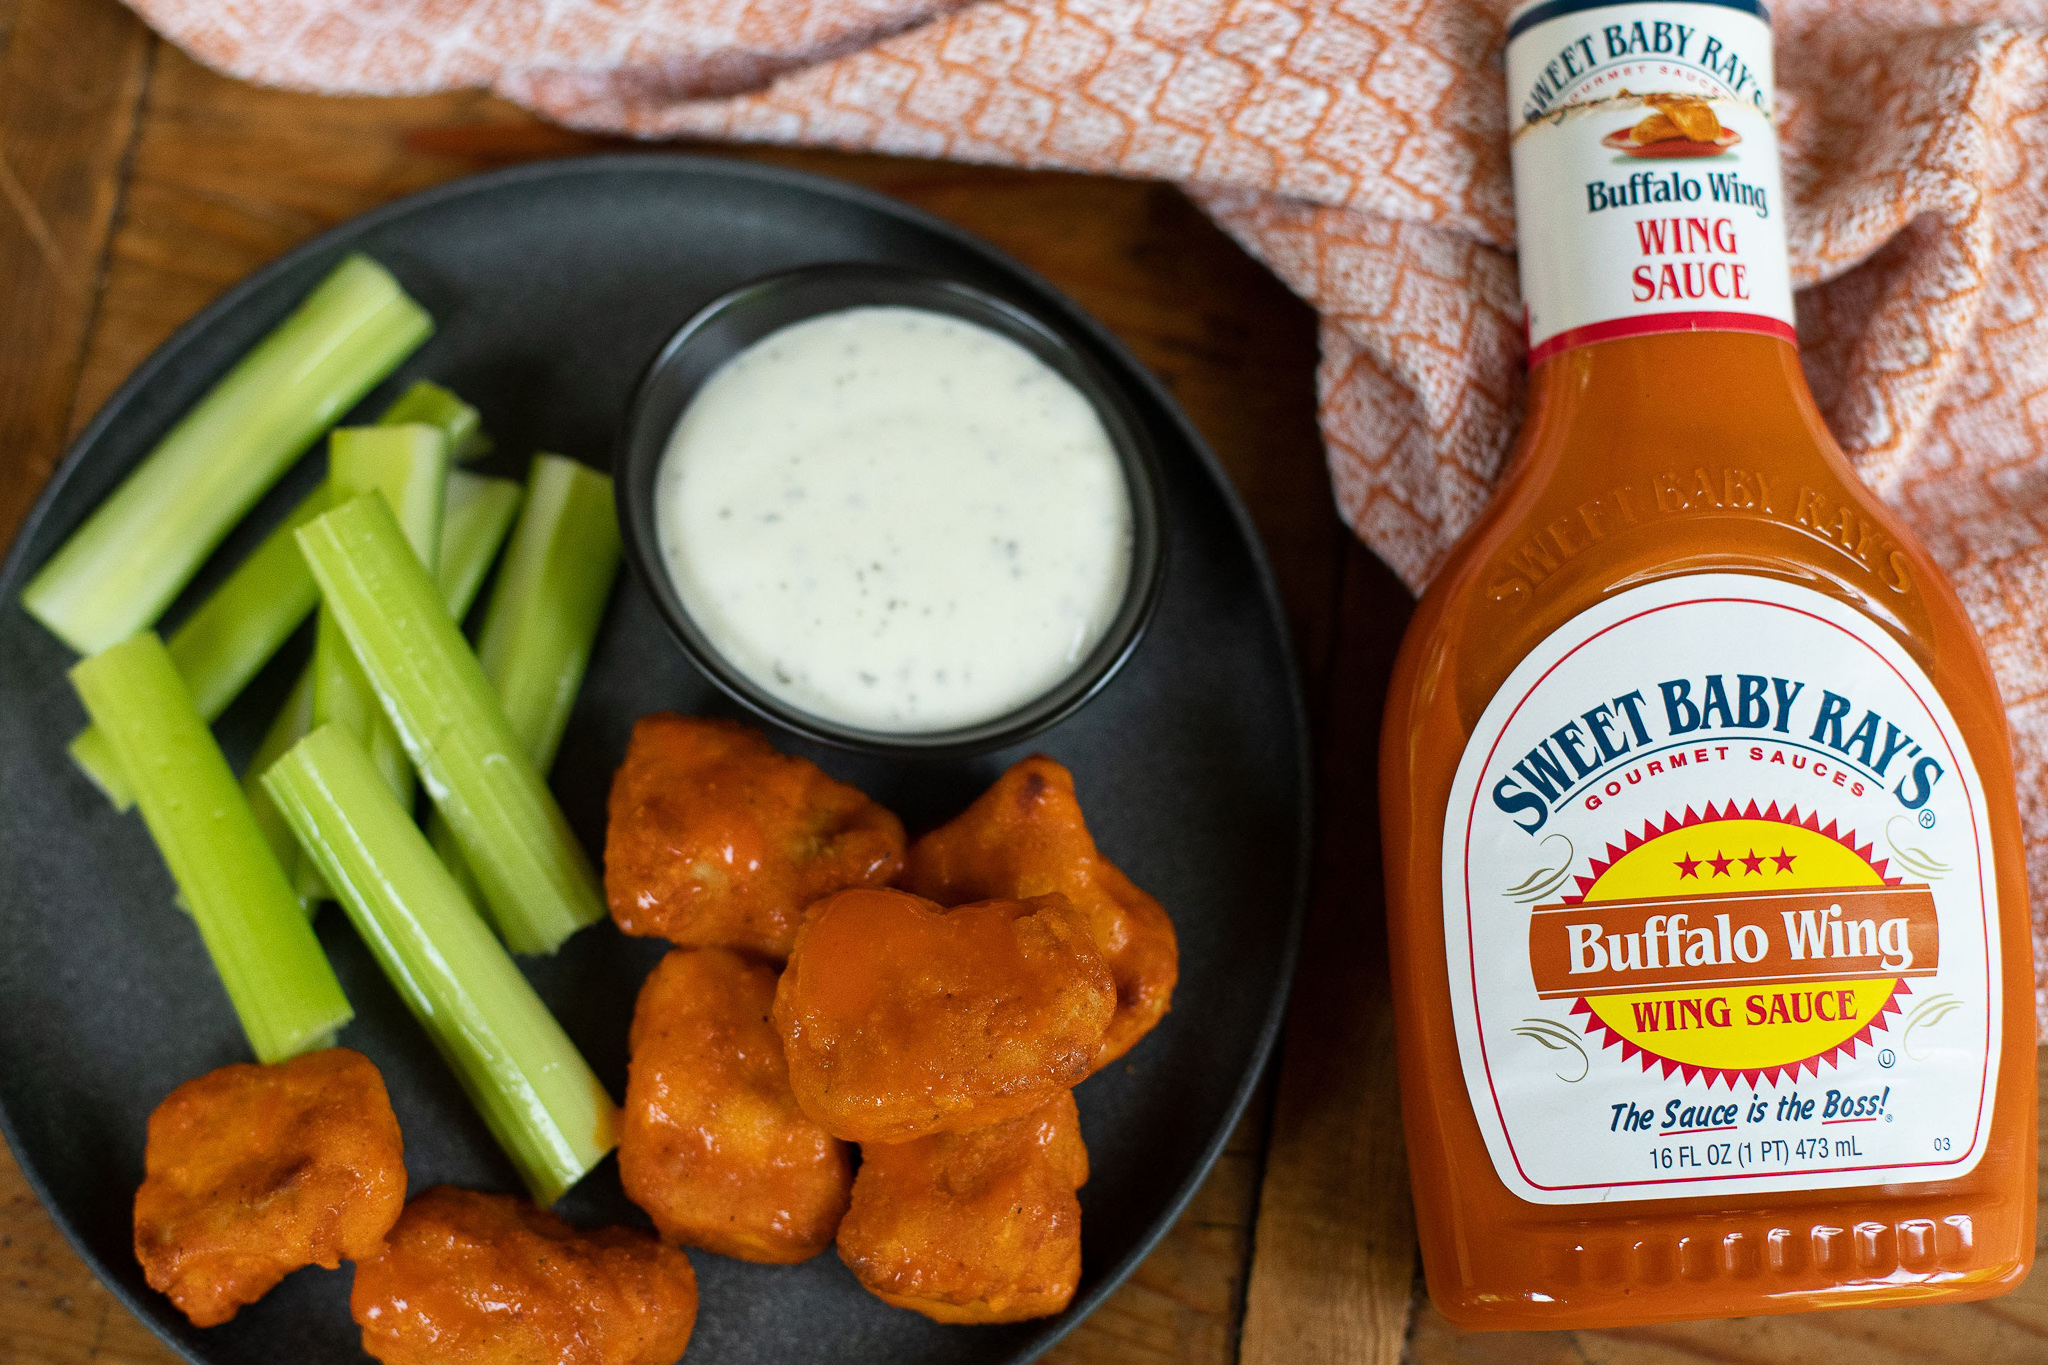 Sweet Baby Ray’s Sauces As Low As 73¢ At Kroger